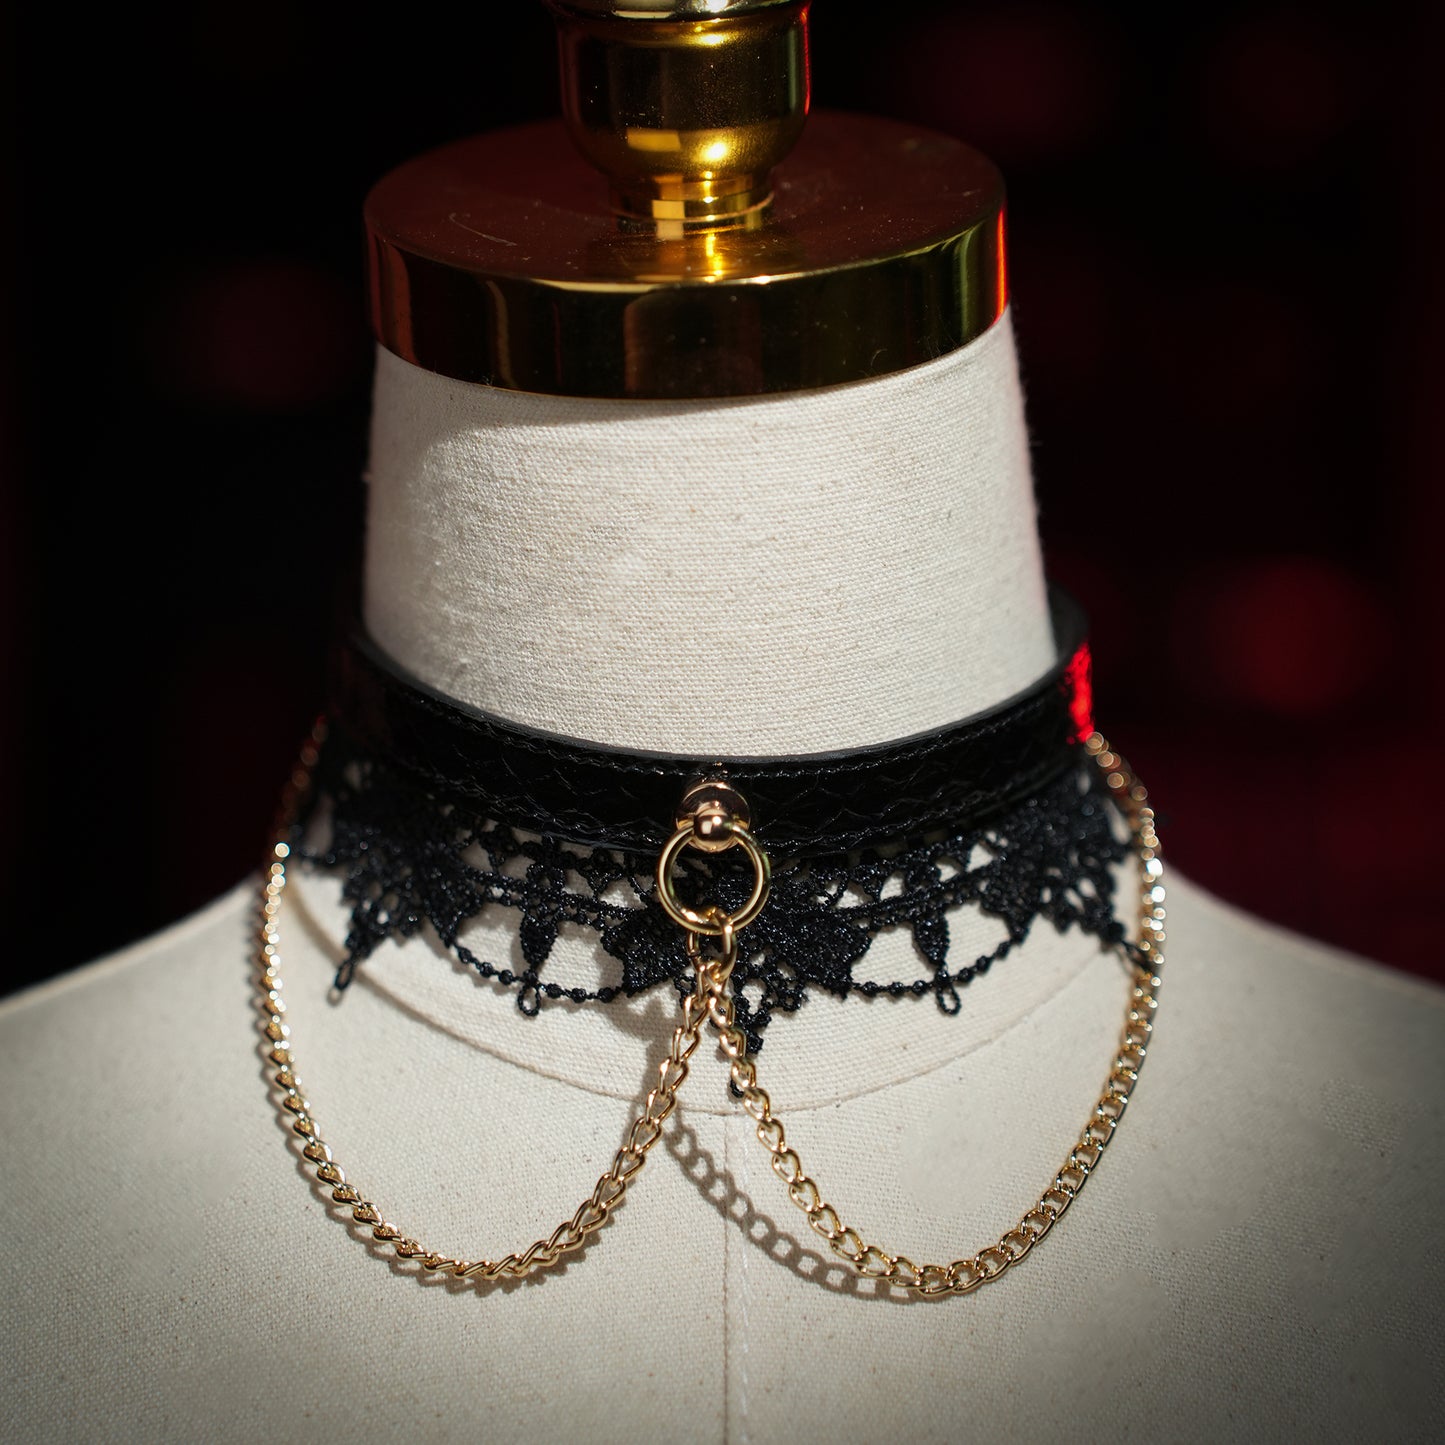 Clotho Black Lace Choker with Double-Chain_Snakeskin